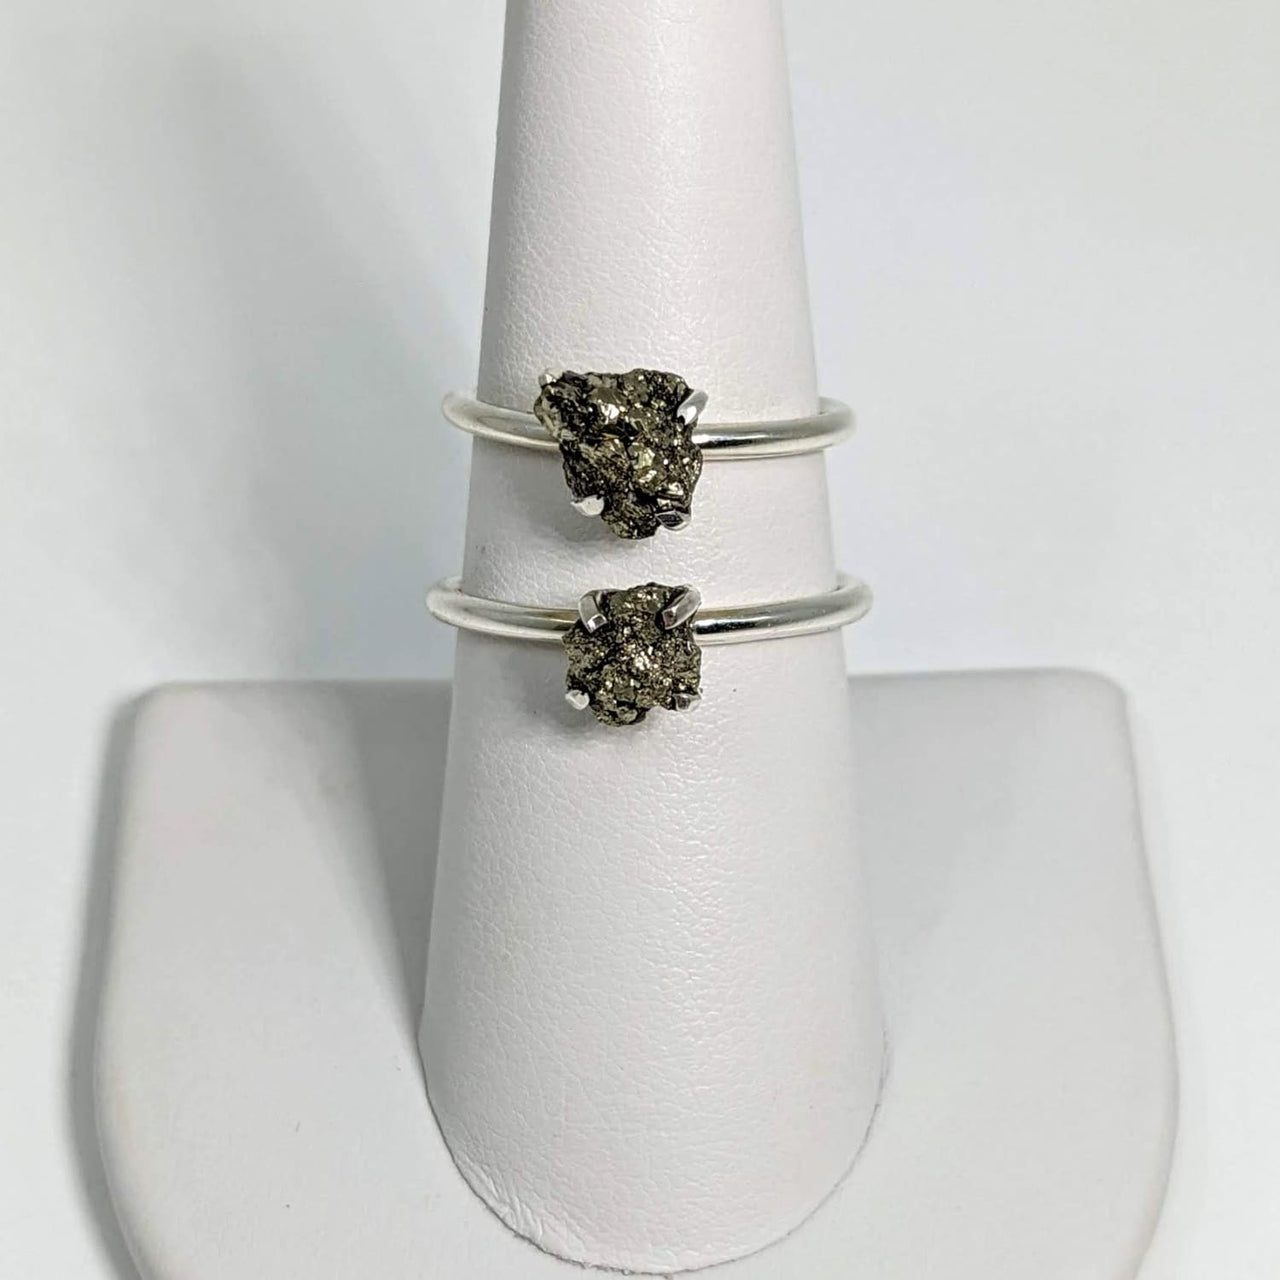 1 Pyrite Crystal Stackable Dainty Ring.925 Sterling Silver 